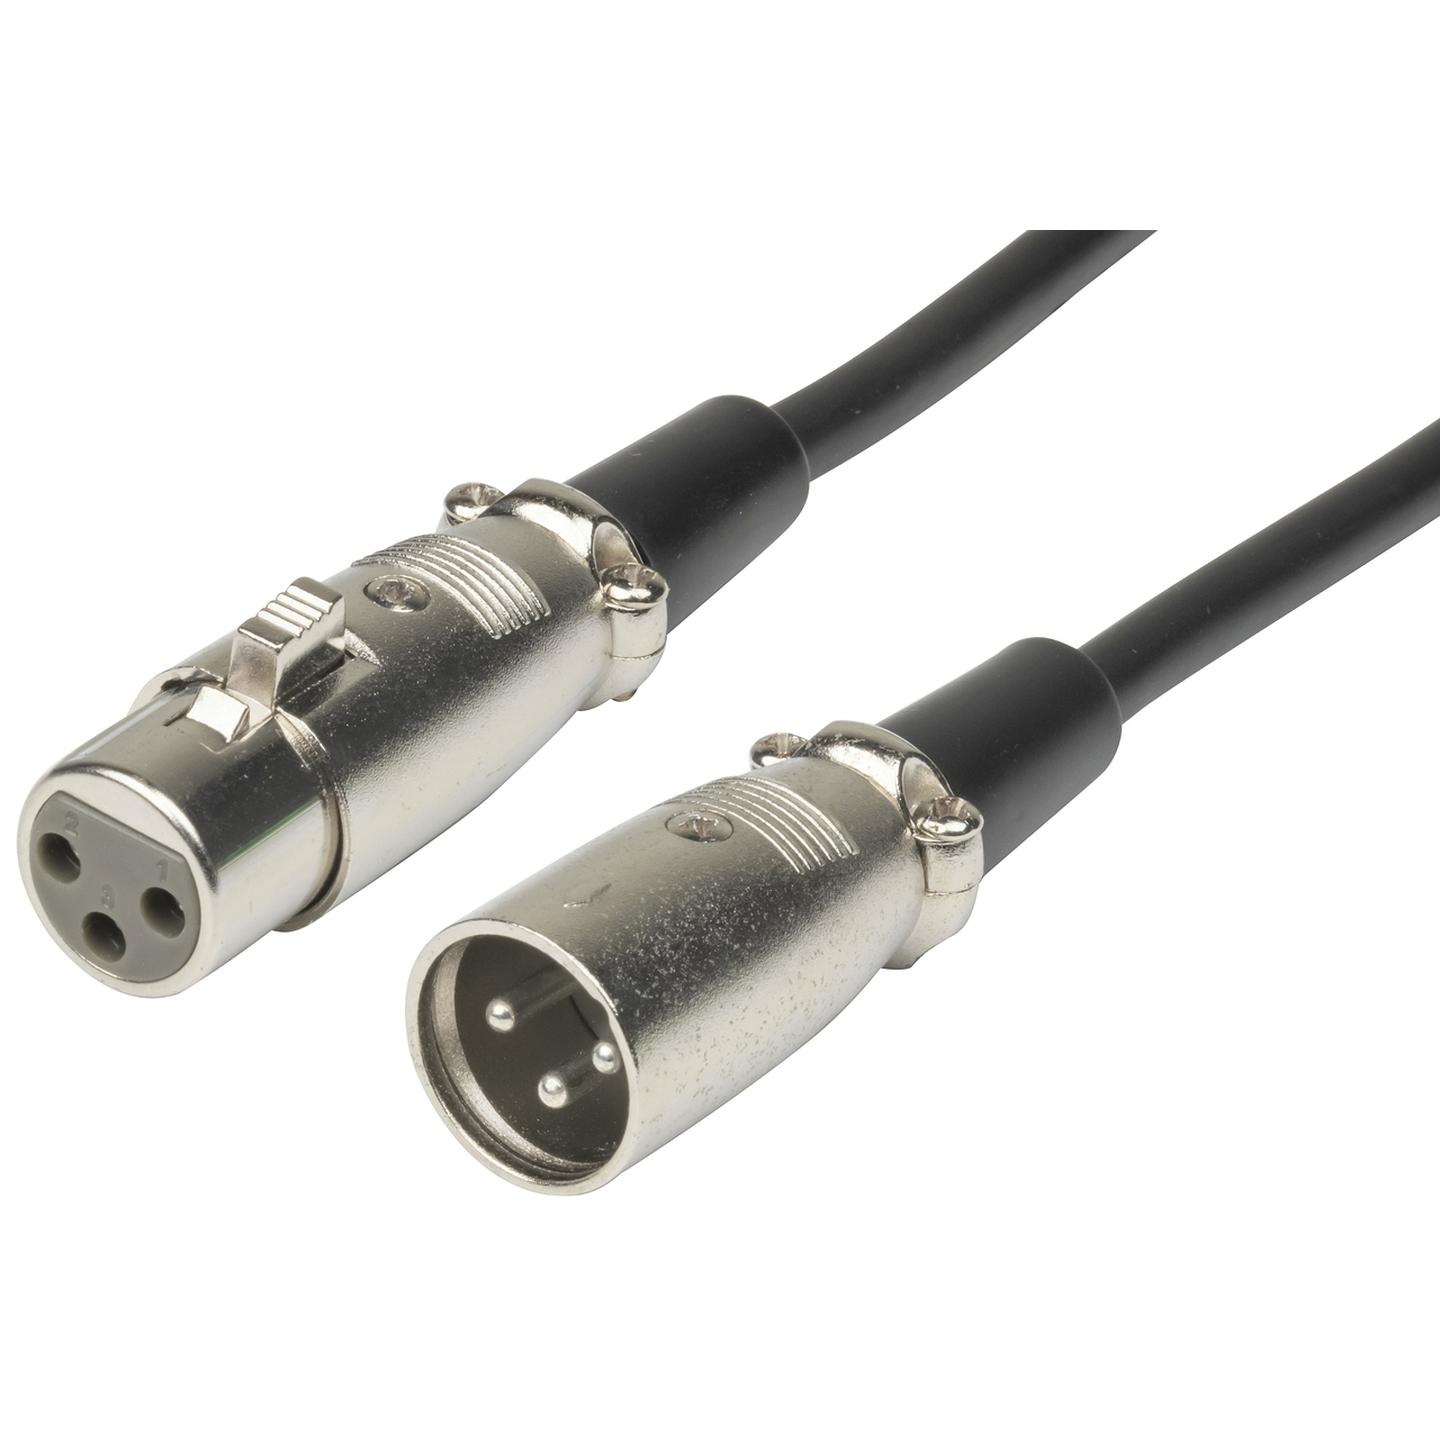 3 Pin XLR Type Extension Cables - 2m